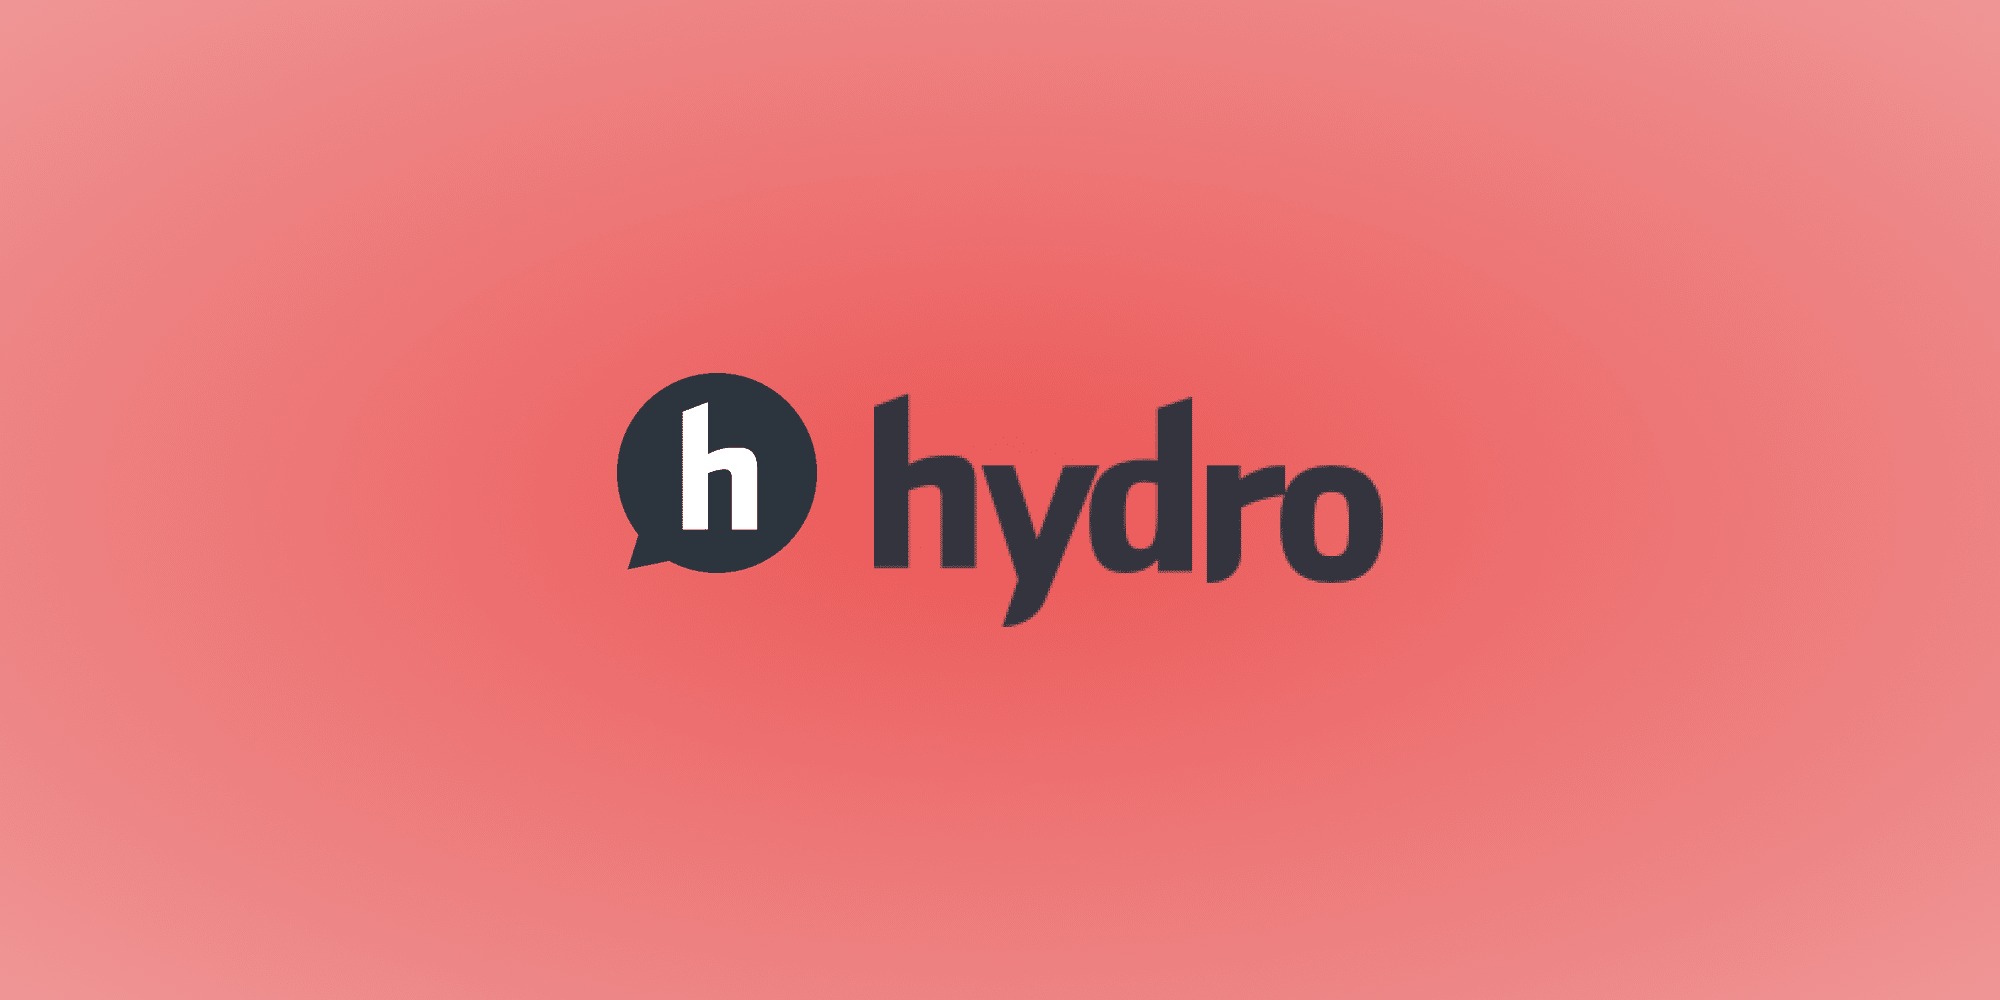 17-surprising-facts-about-hydro-protocol-hot